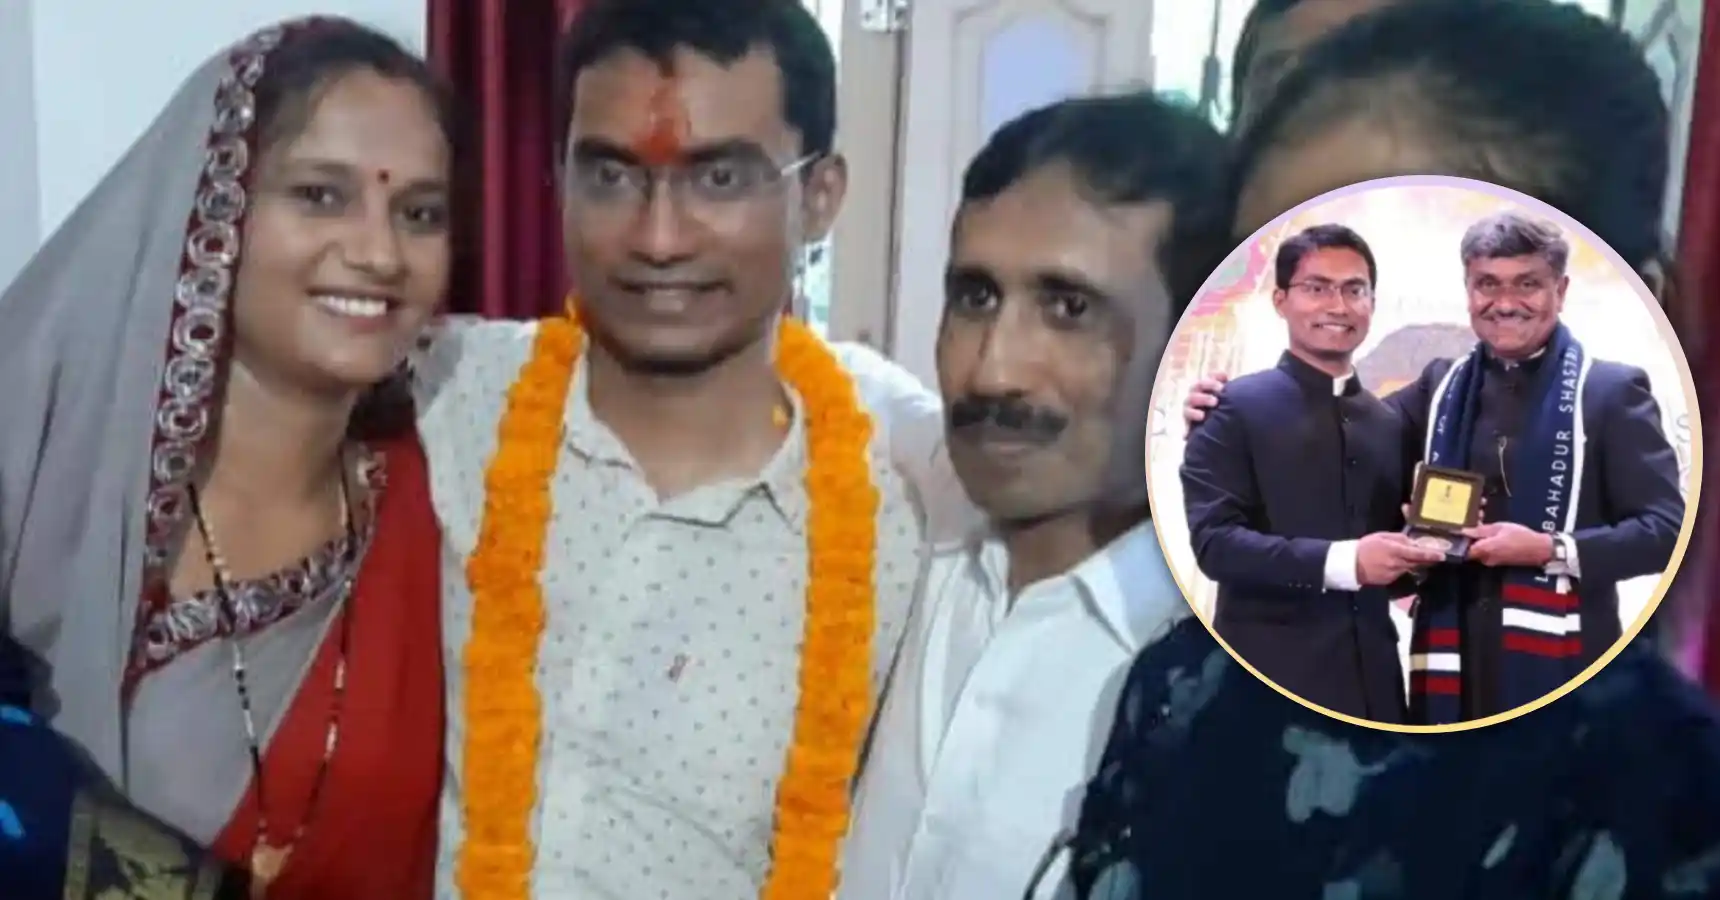 Shubham Kumar, a resident of Bihar's Katihar, secured the first position in the UPSC examination